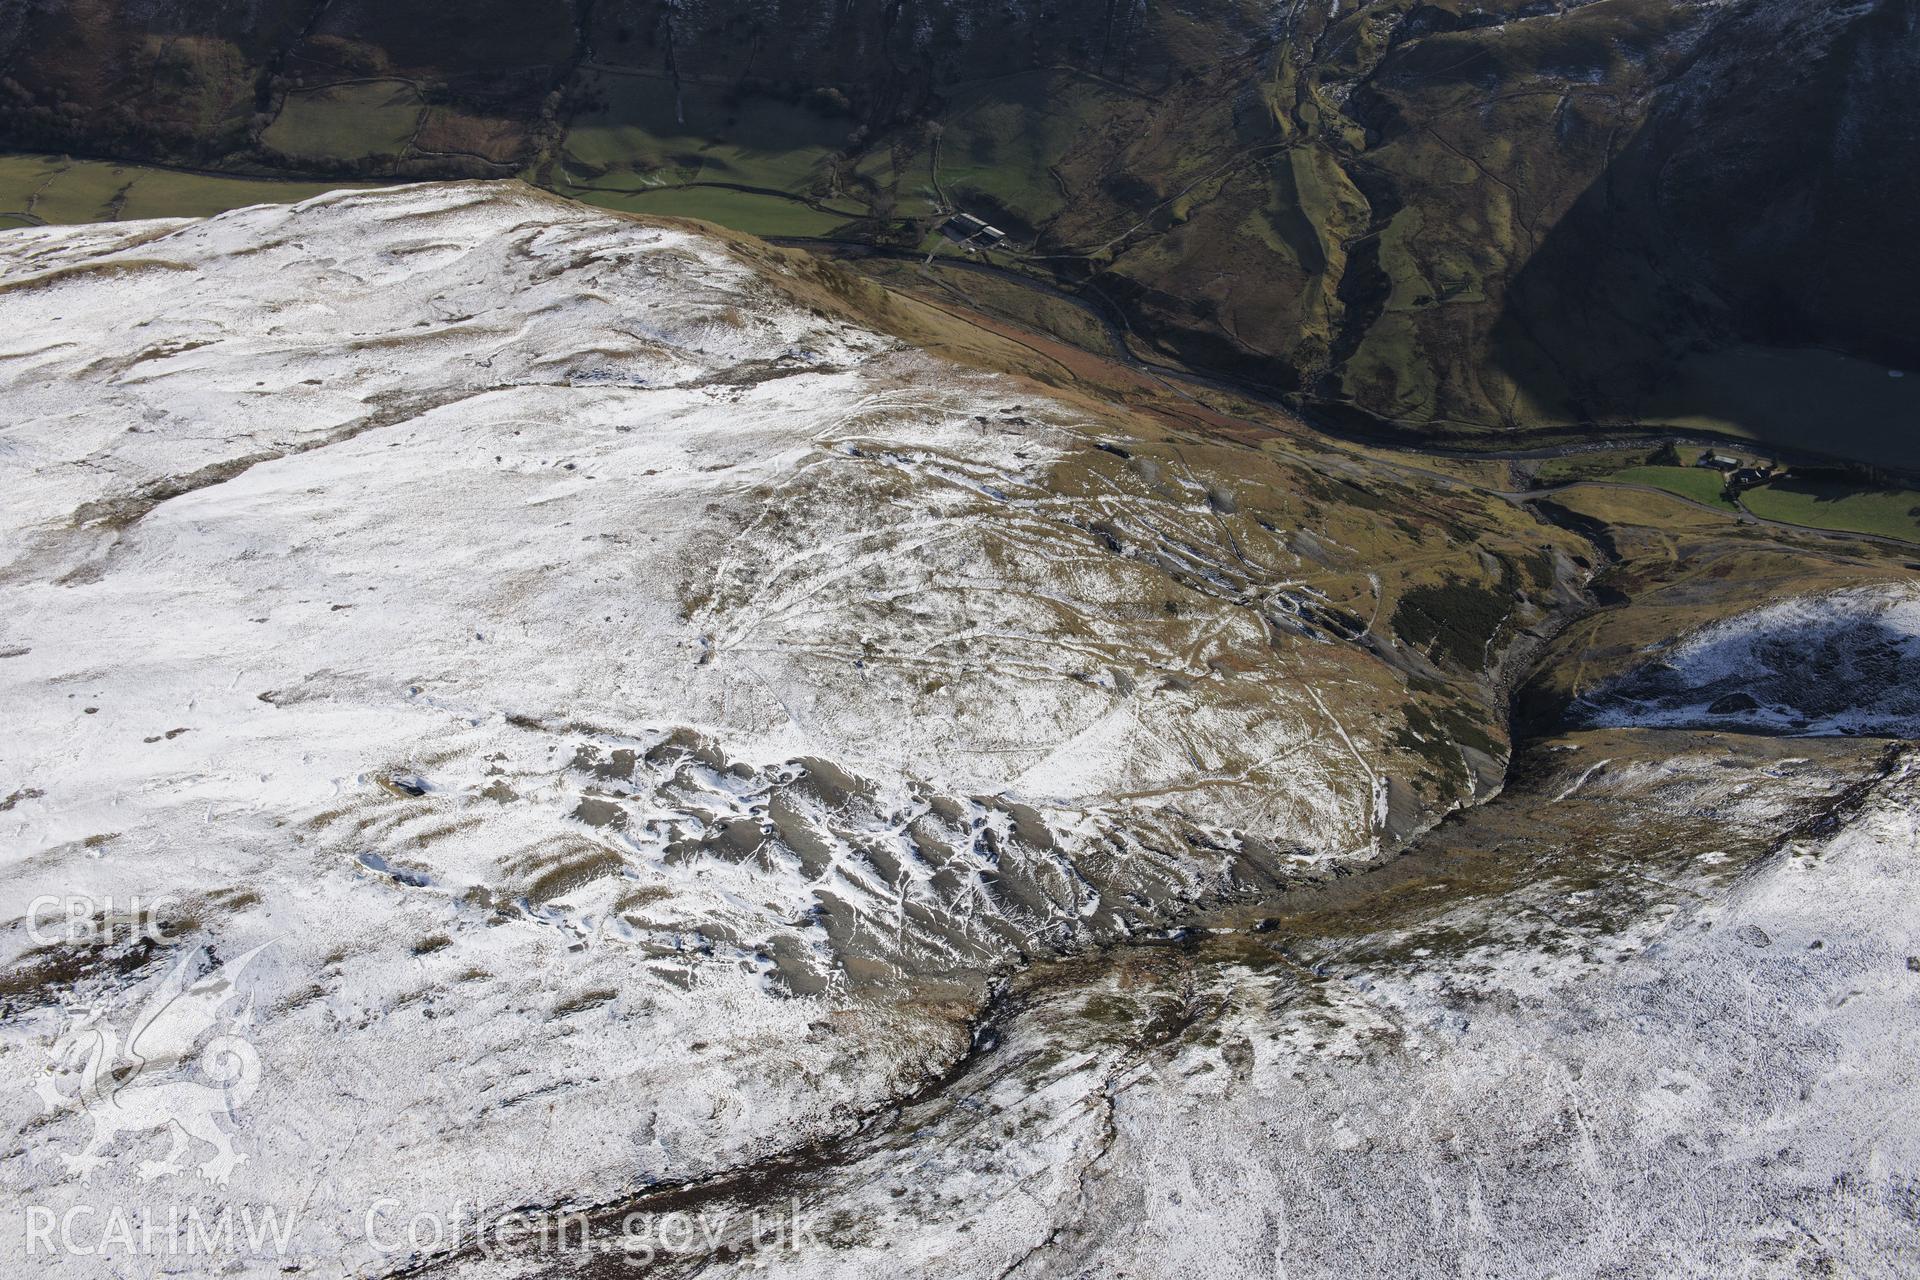 Former Copa Hill opencast mine, Cwmystwyth, south west of Llangurig. Oblique aerial photograph taken during the Royal Commission's programme of archaeological aerial reconnaissance by Toby Driver on 4th February 2015.